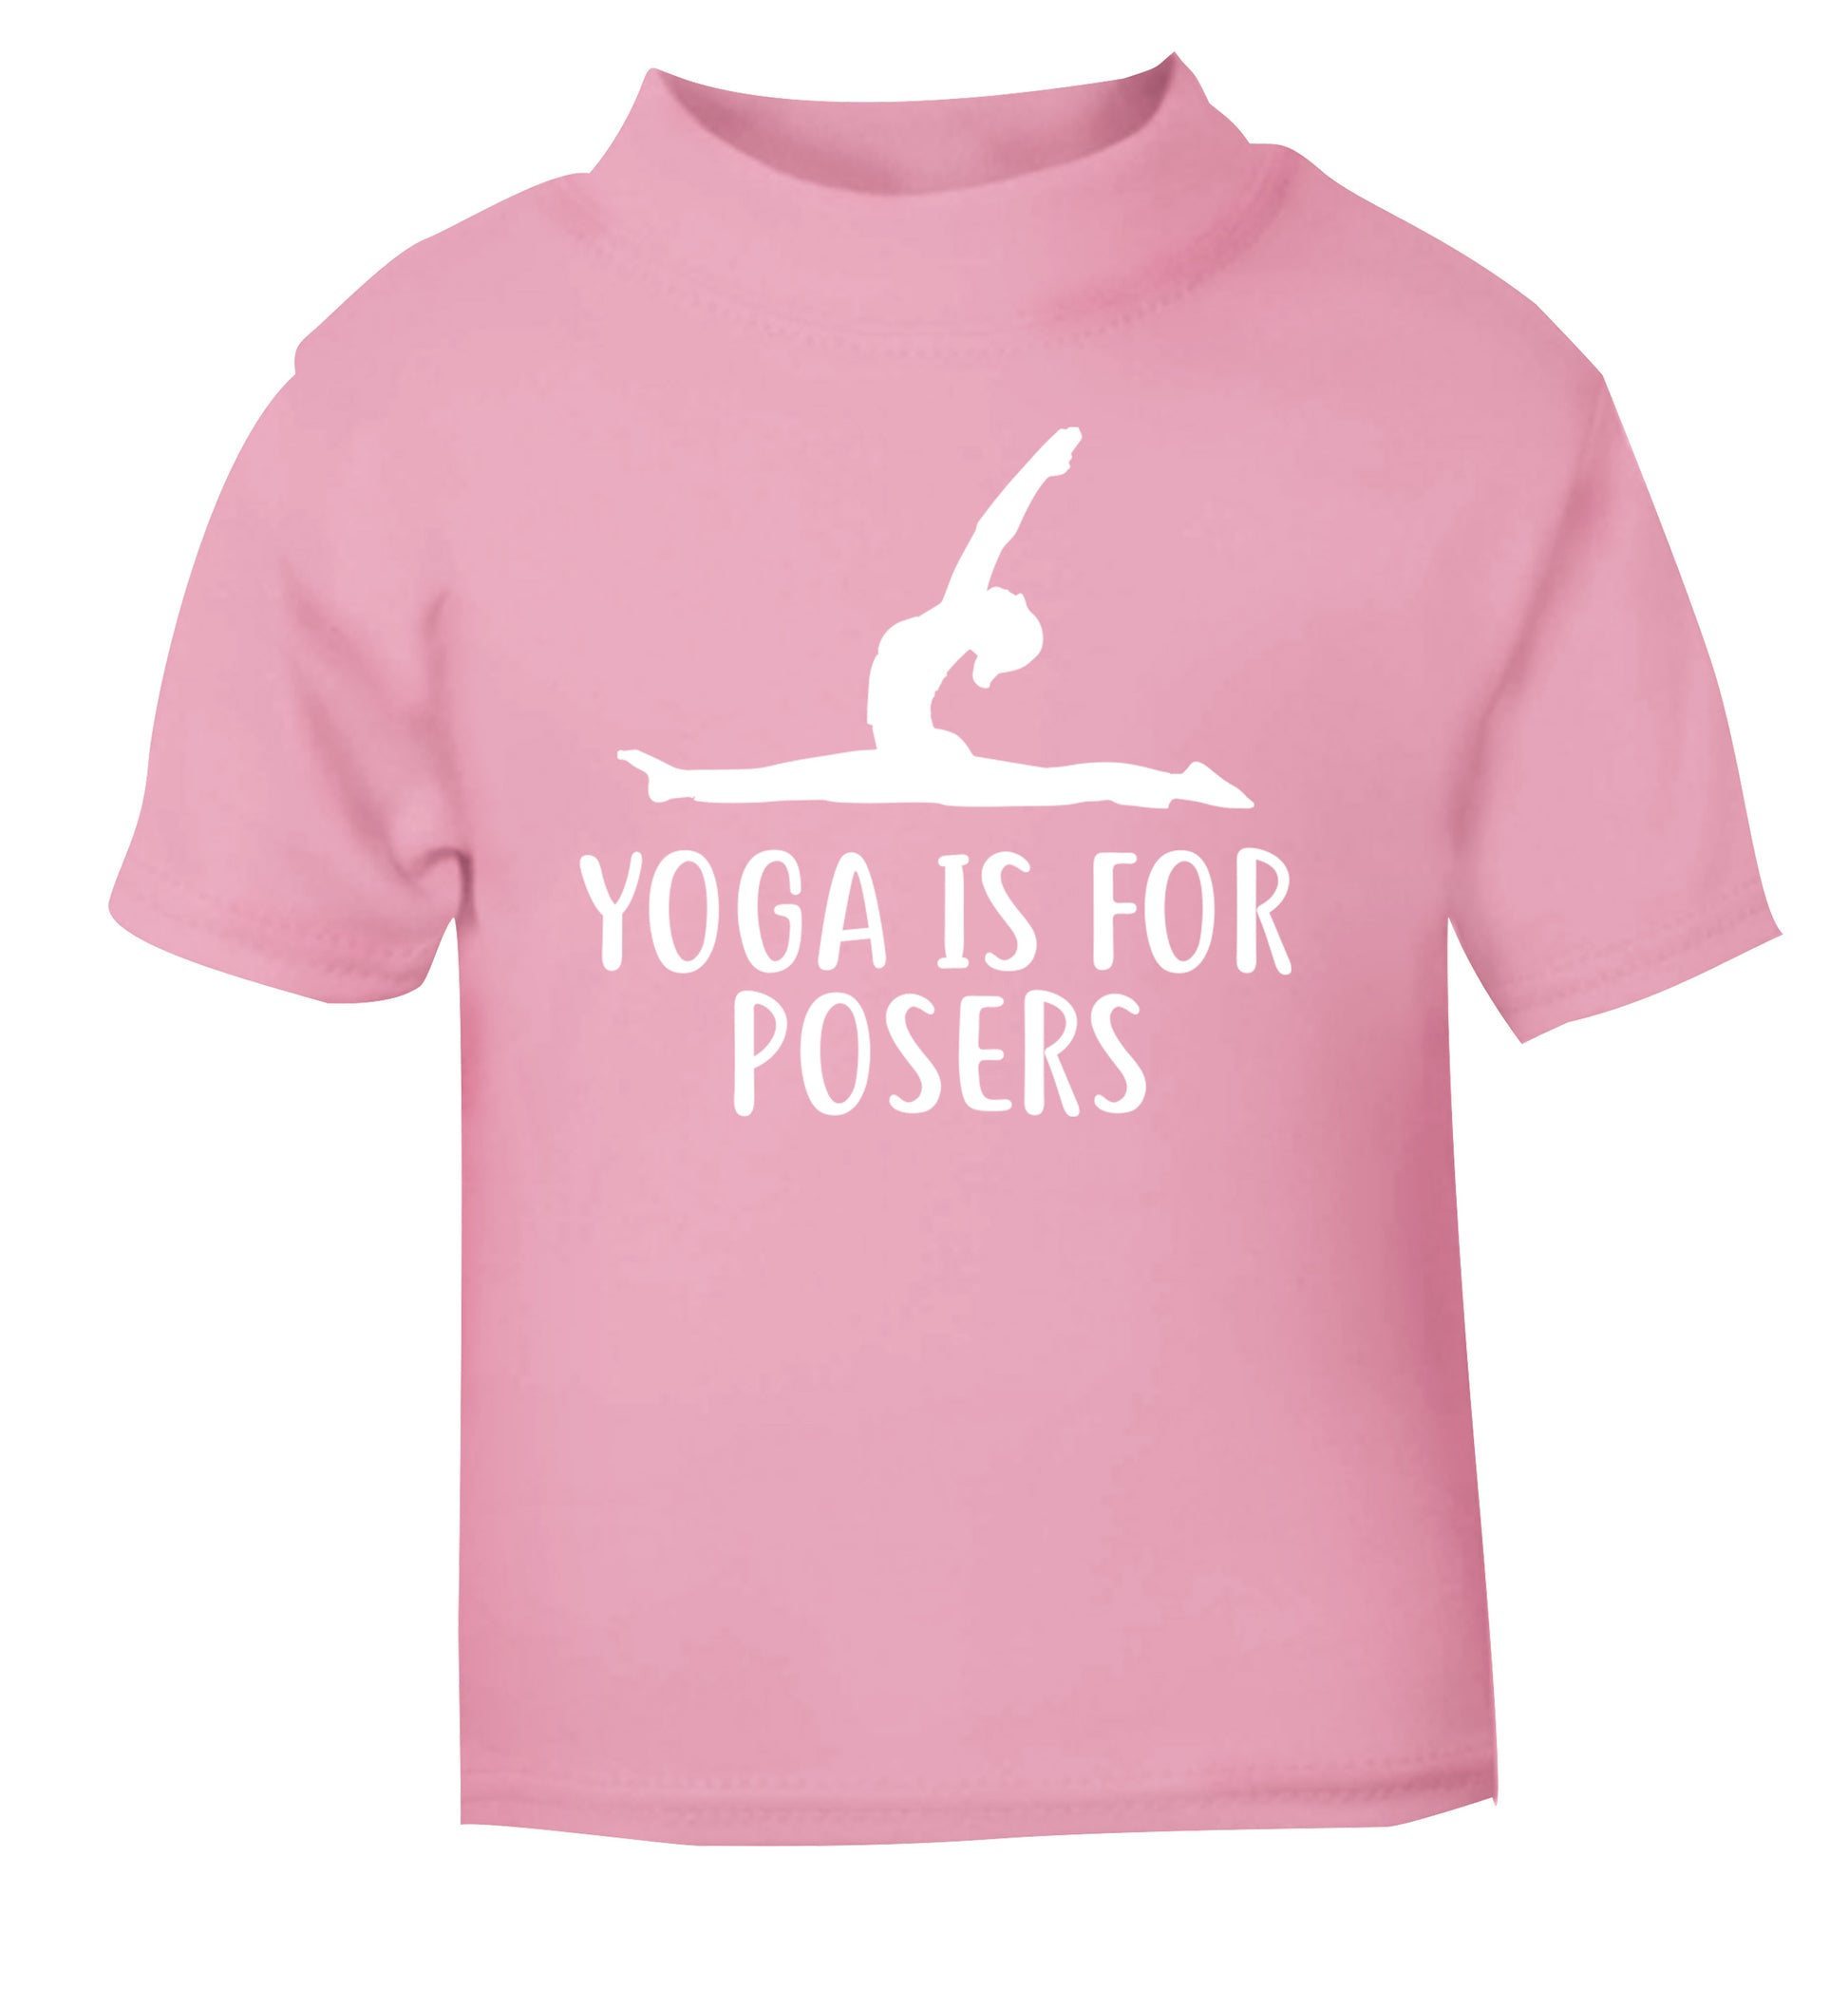 Yoga is for posers light pink Baby Toddler Tshirt 2 Years